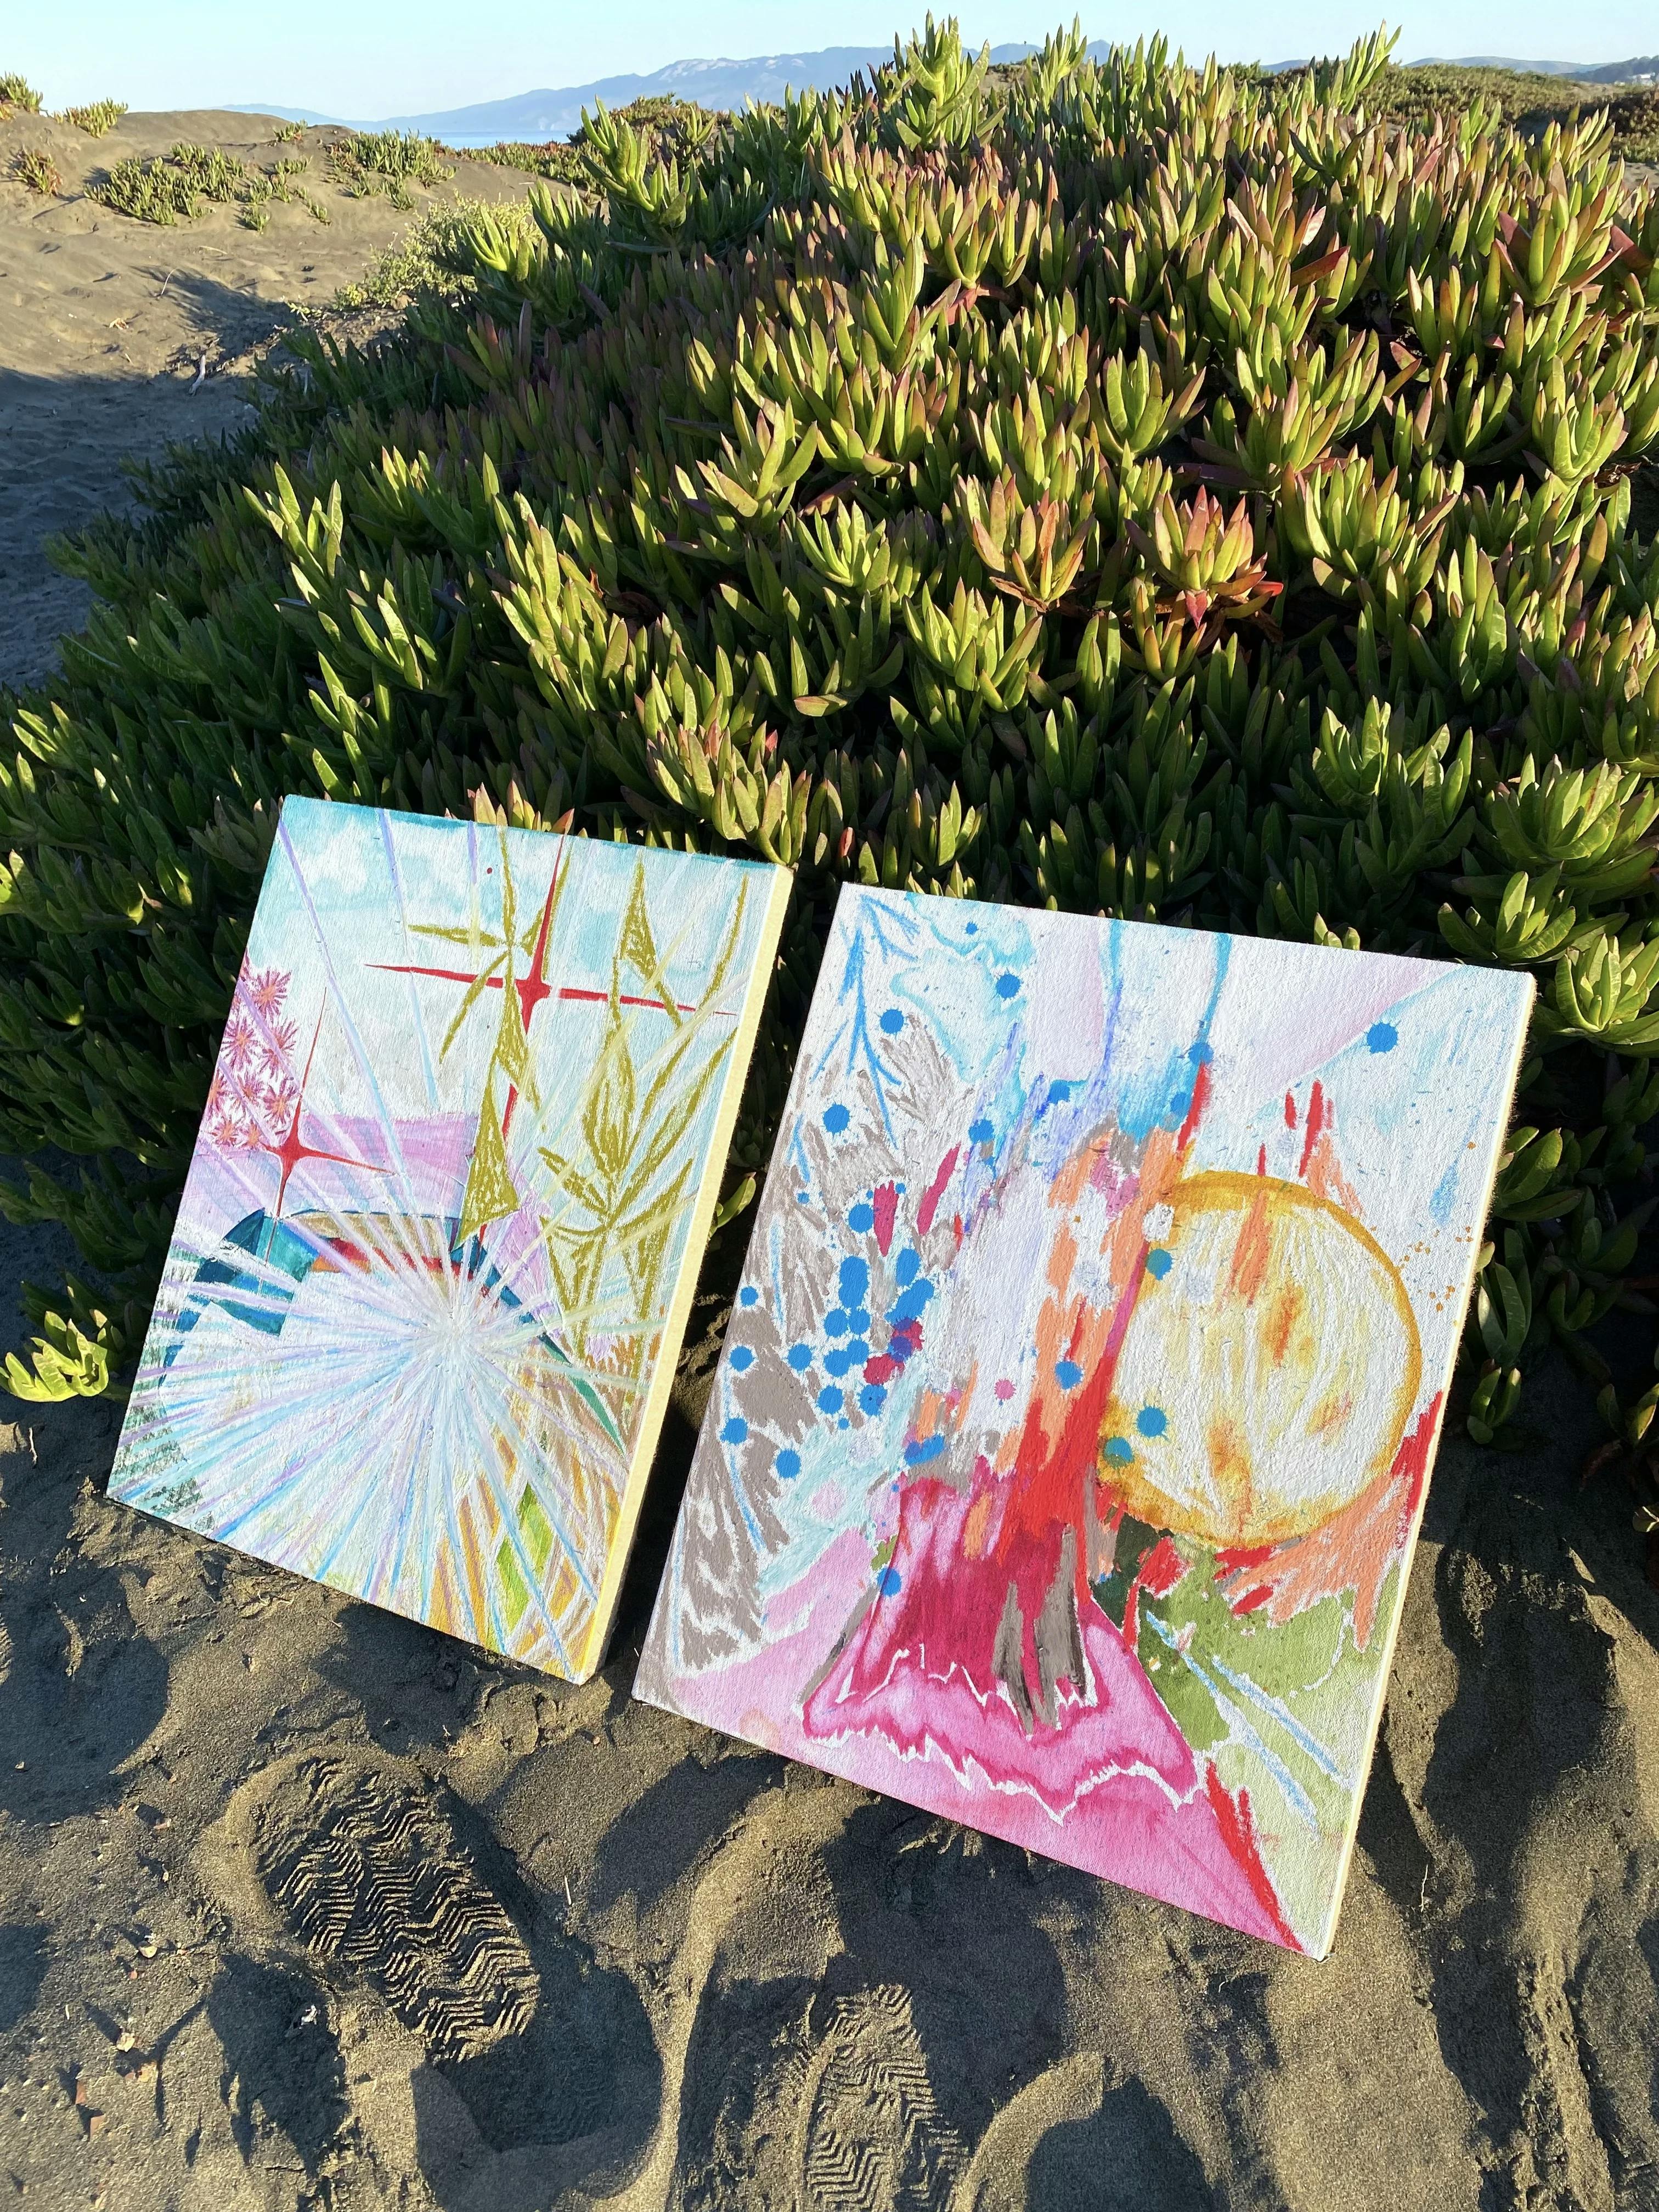 Two abstract paintings by artist Tyler Scheidt leaning against a bush on the sand.